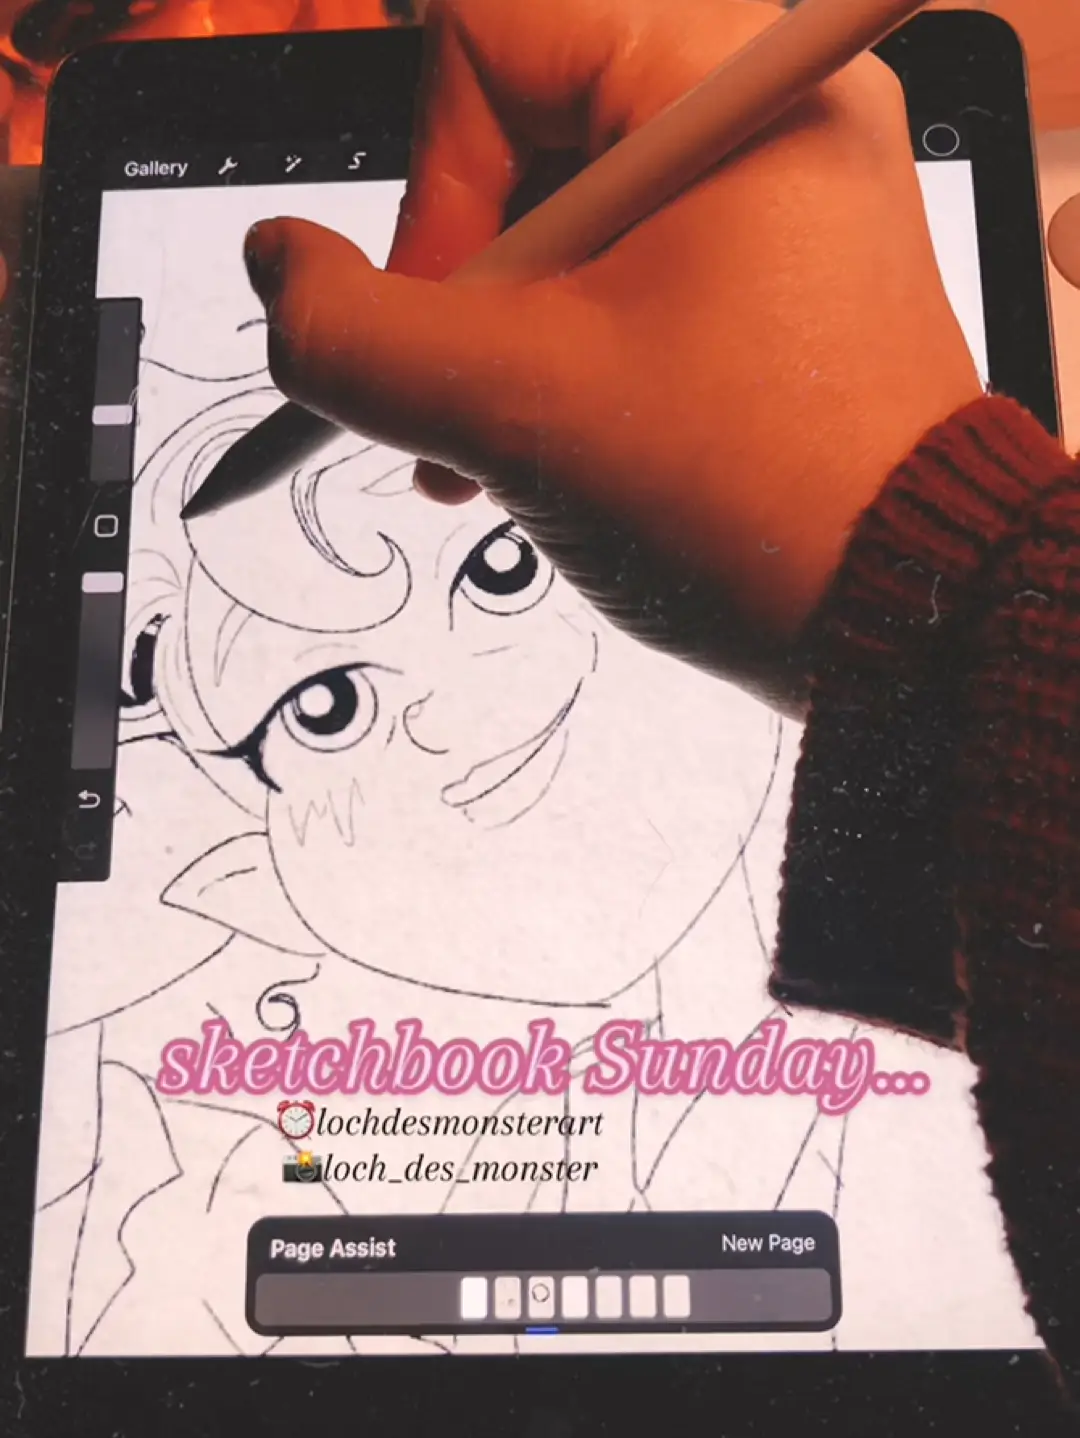 Sketchbook for fan art kpop: let's funny with your art and write